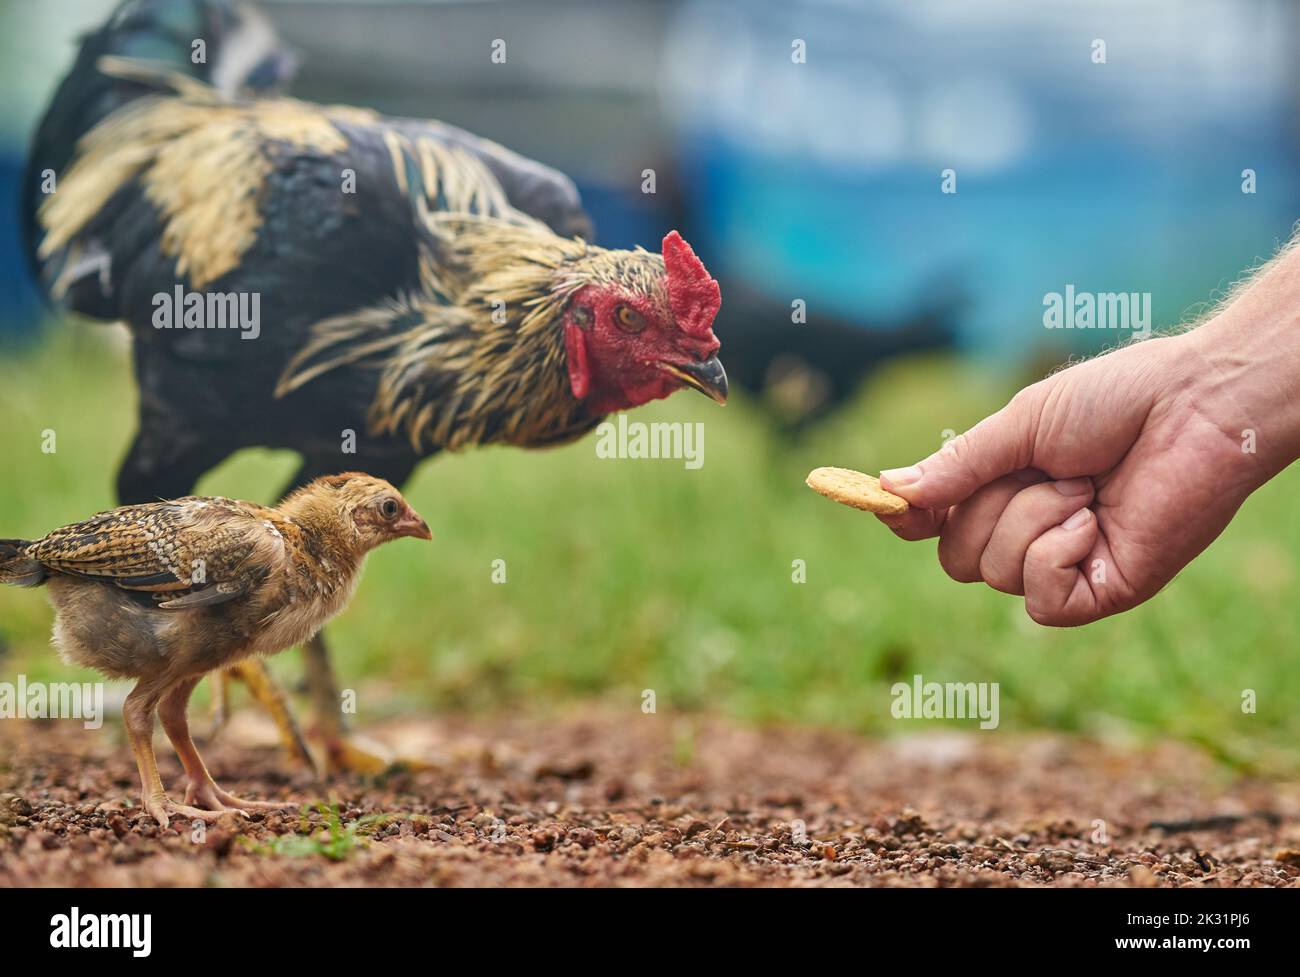 A chicken takes a biscuit from a human hand, conceptual image, that takes the biscuit. Stock Photo